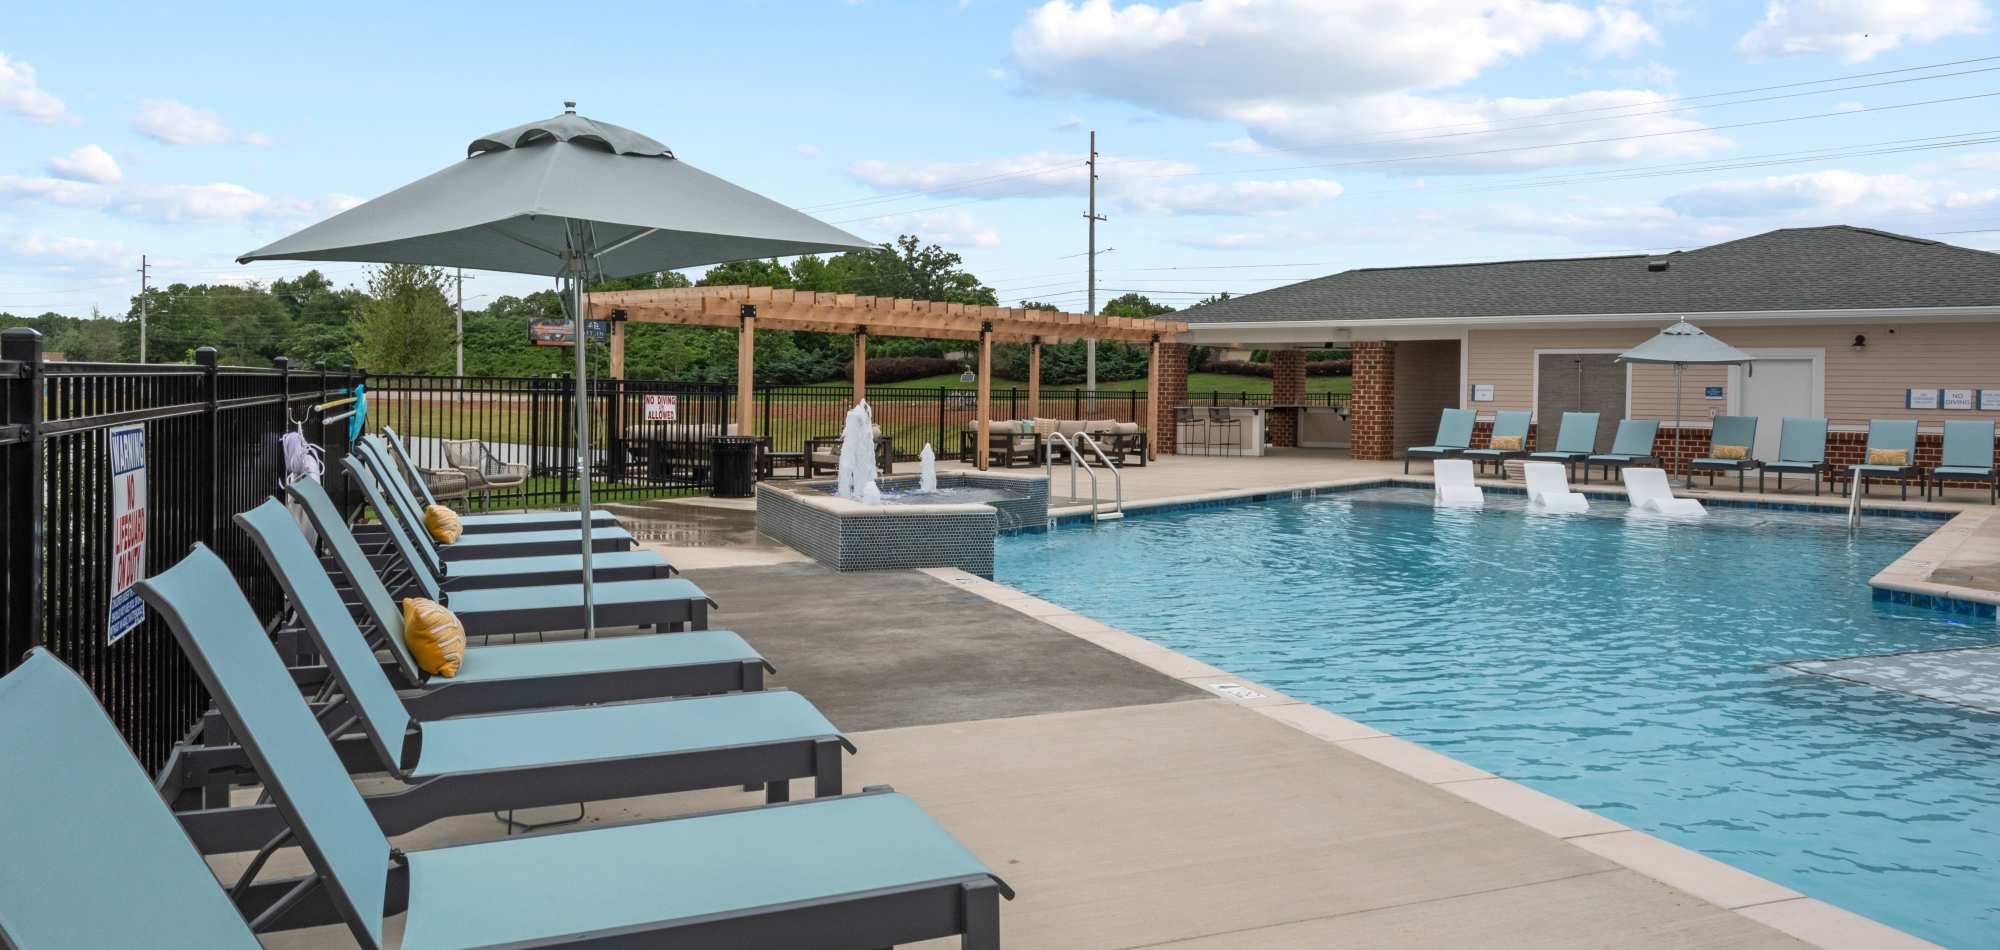 Outdoor pool area with lounge chairs at Attain at Bradford Creek apartments in Huntsville Alabama